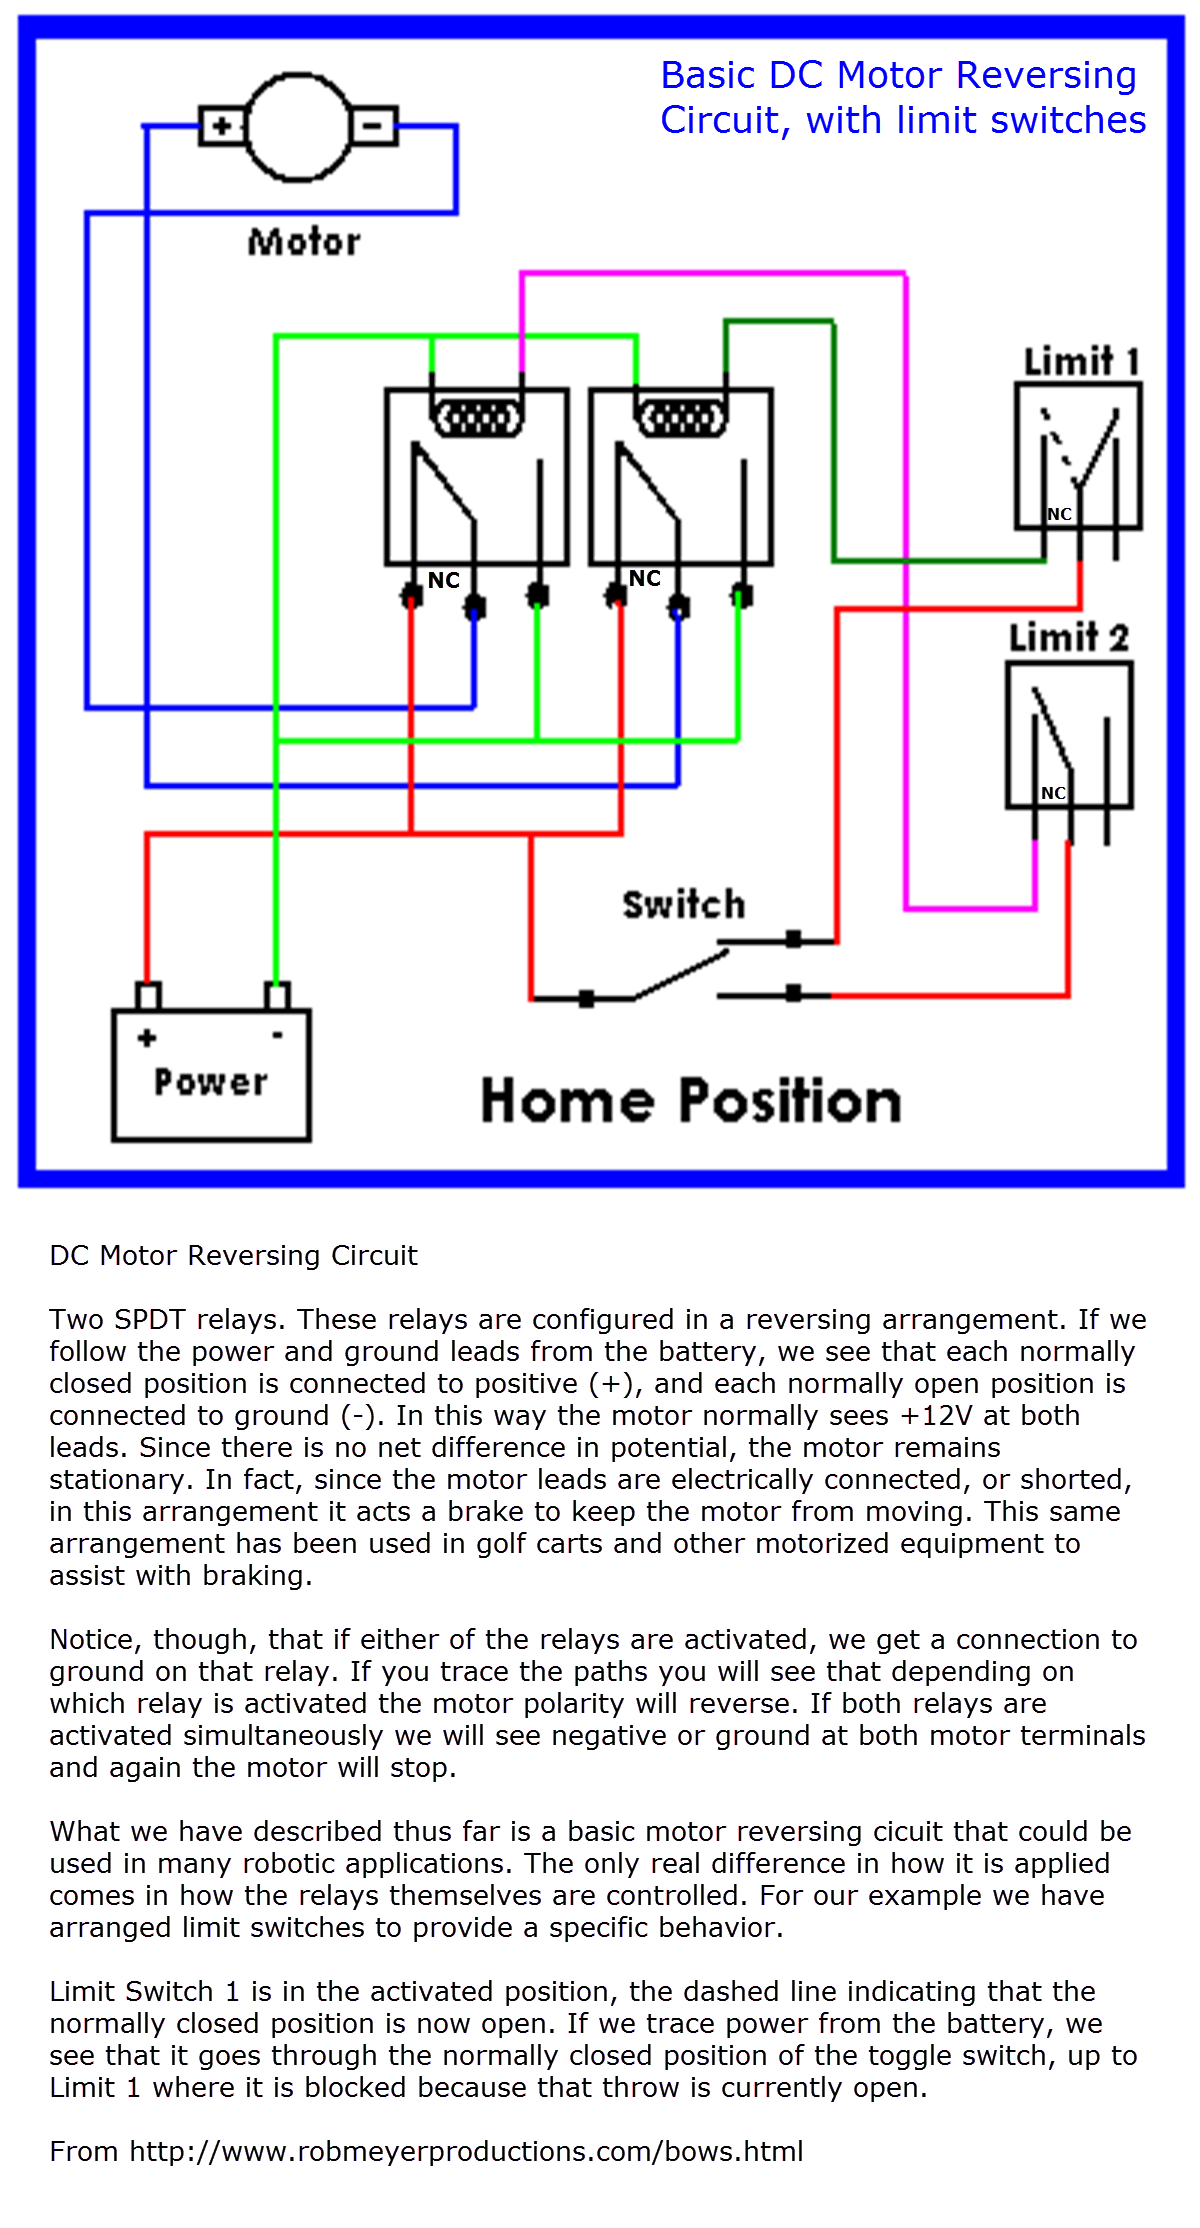 Basic DC Motor Reversing Circuit with Relays and Limit Switches